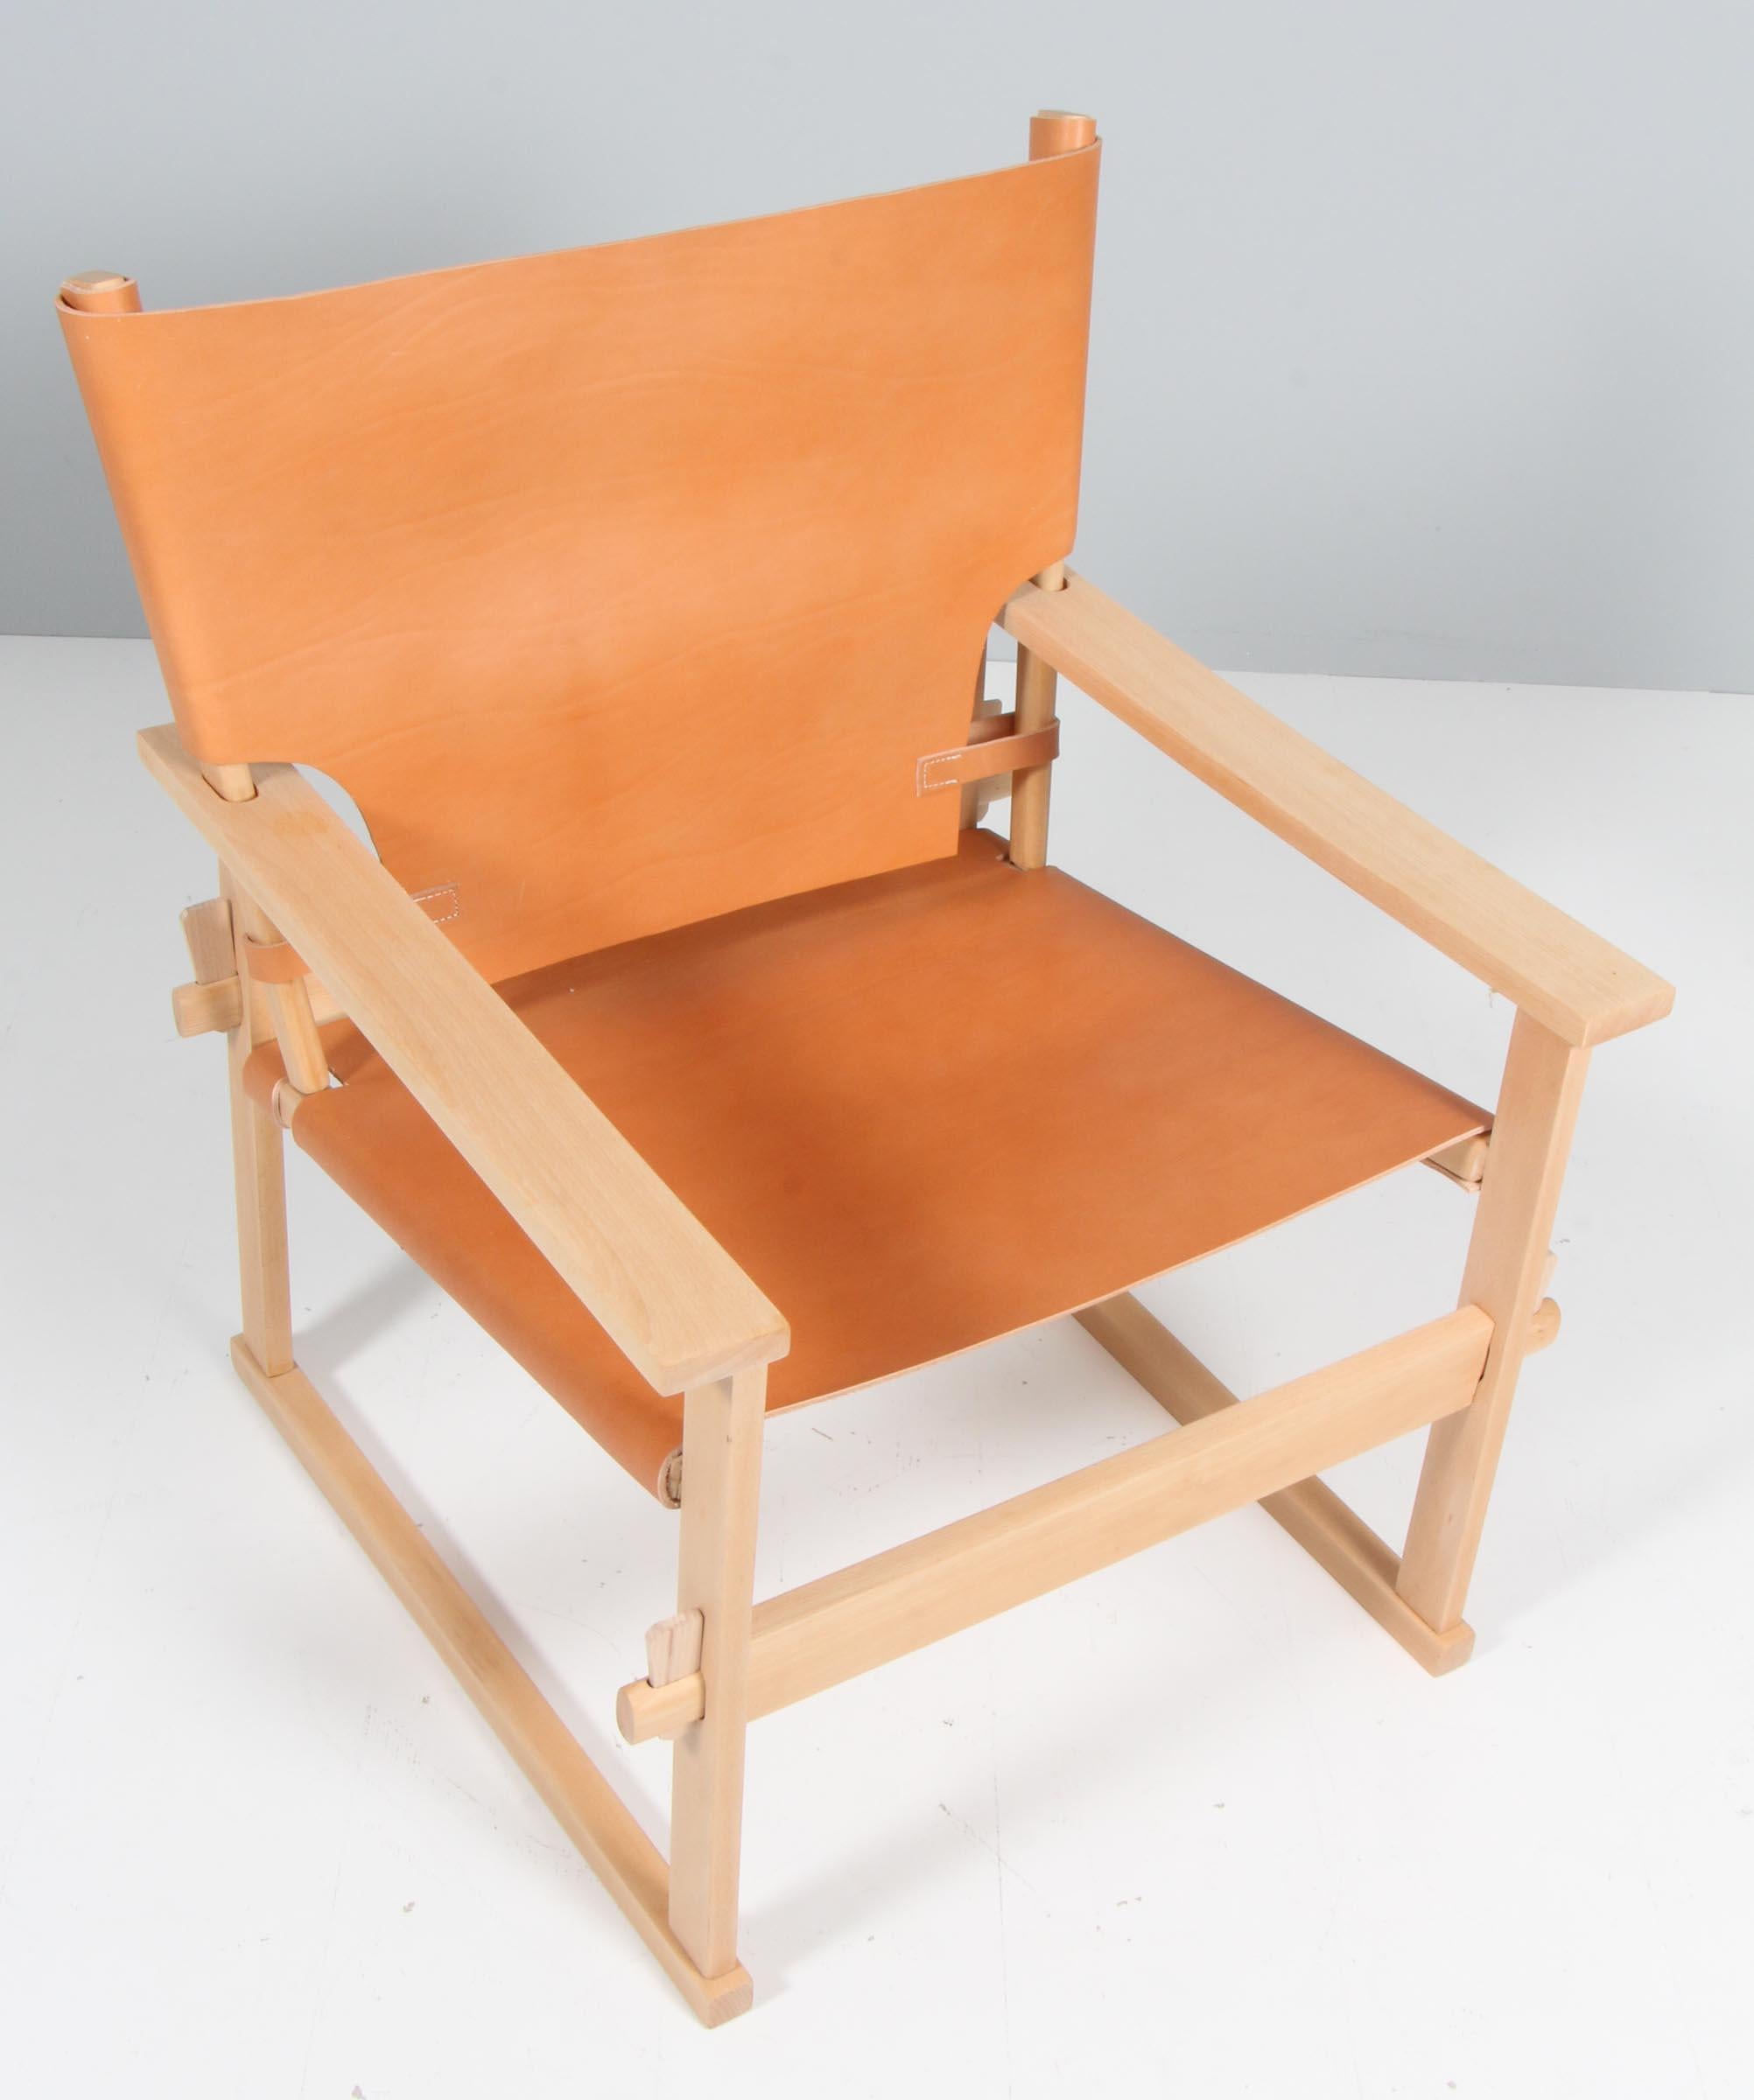 Kai Winding Safari / safari chair, frame of beech.

New upholstered with saddle leather.

Made by Poul Hundevad.